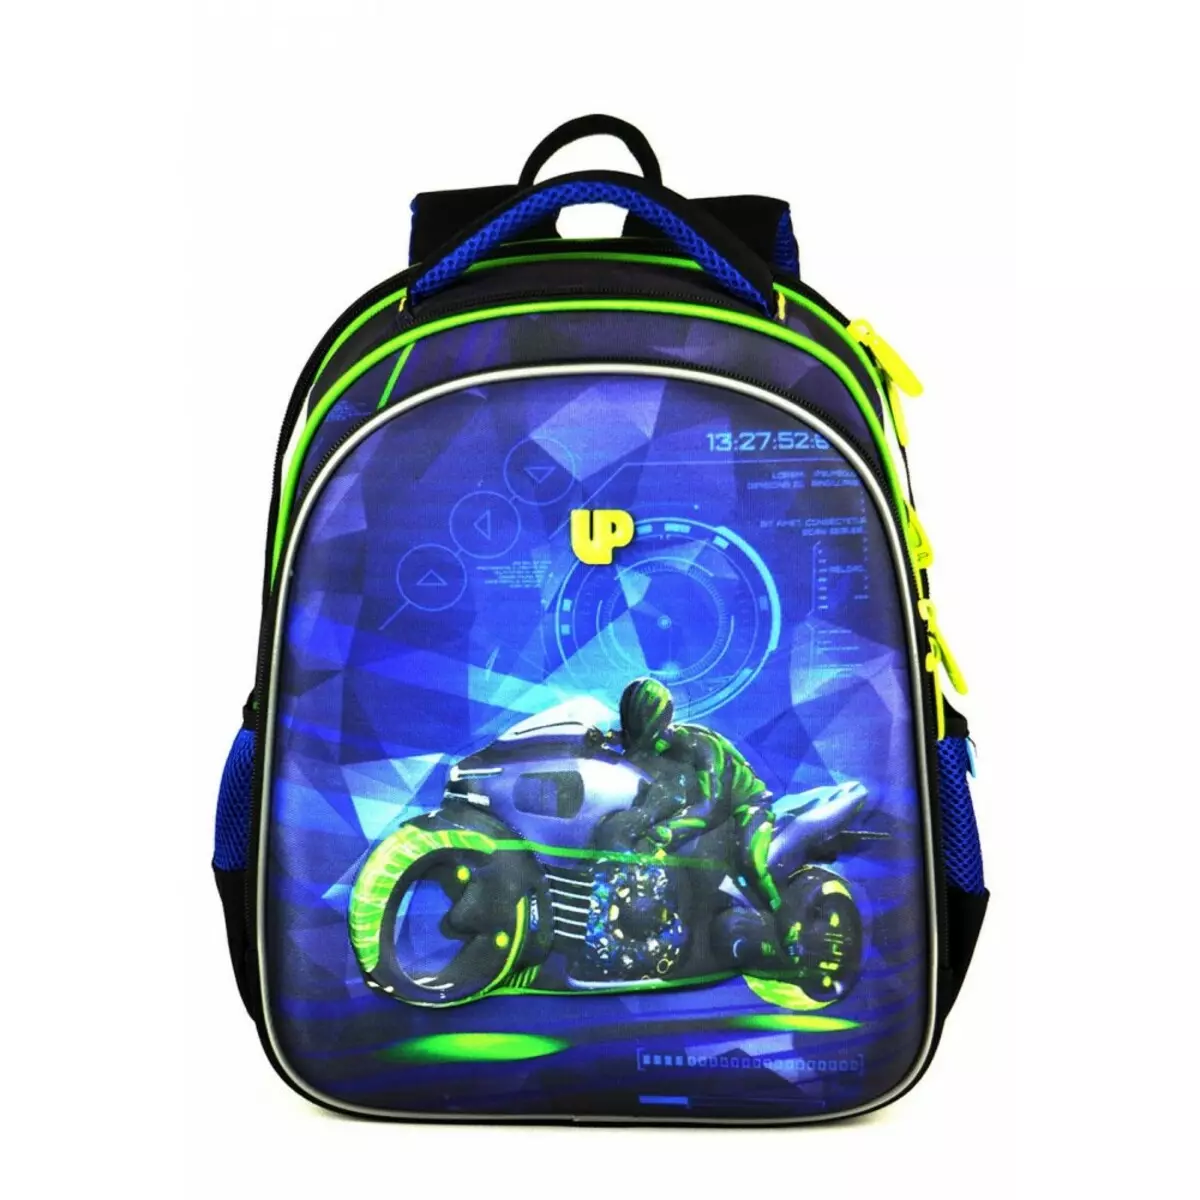 Backpacks UFO People: School and Casual, For Girls and Boys, With Anatomical and Other Back, Reviews 15400_21